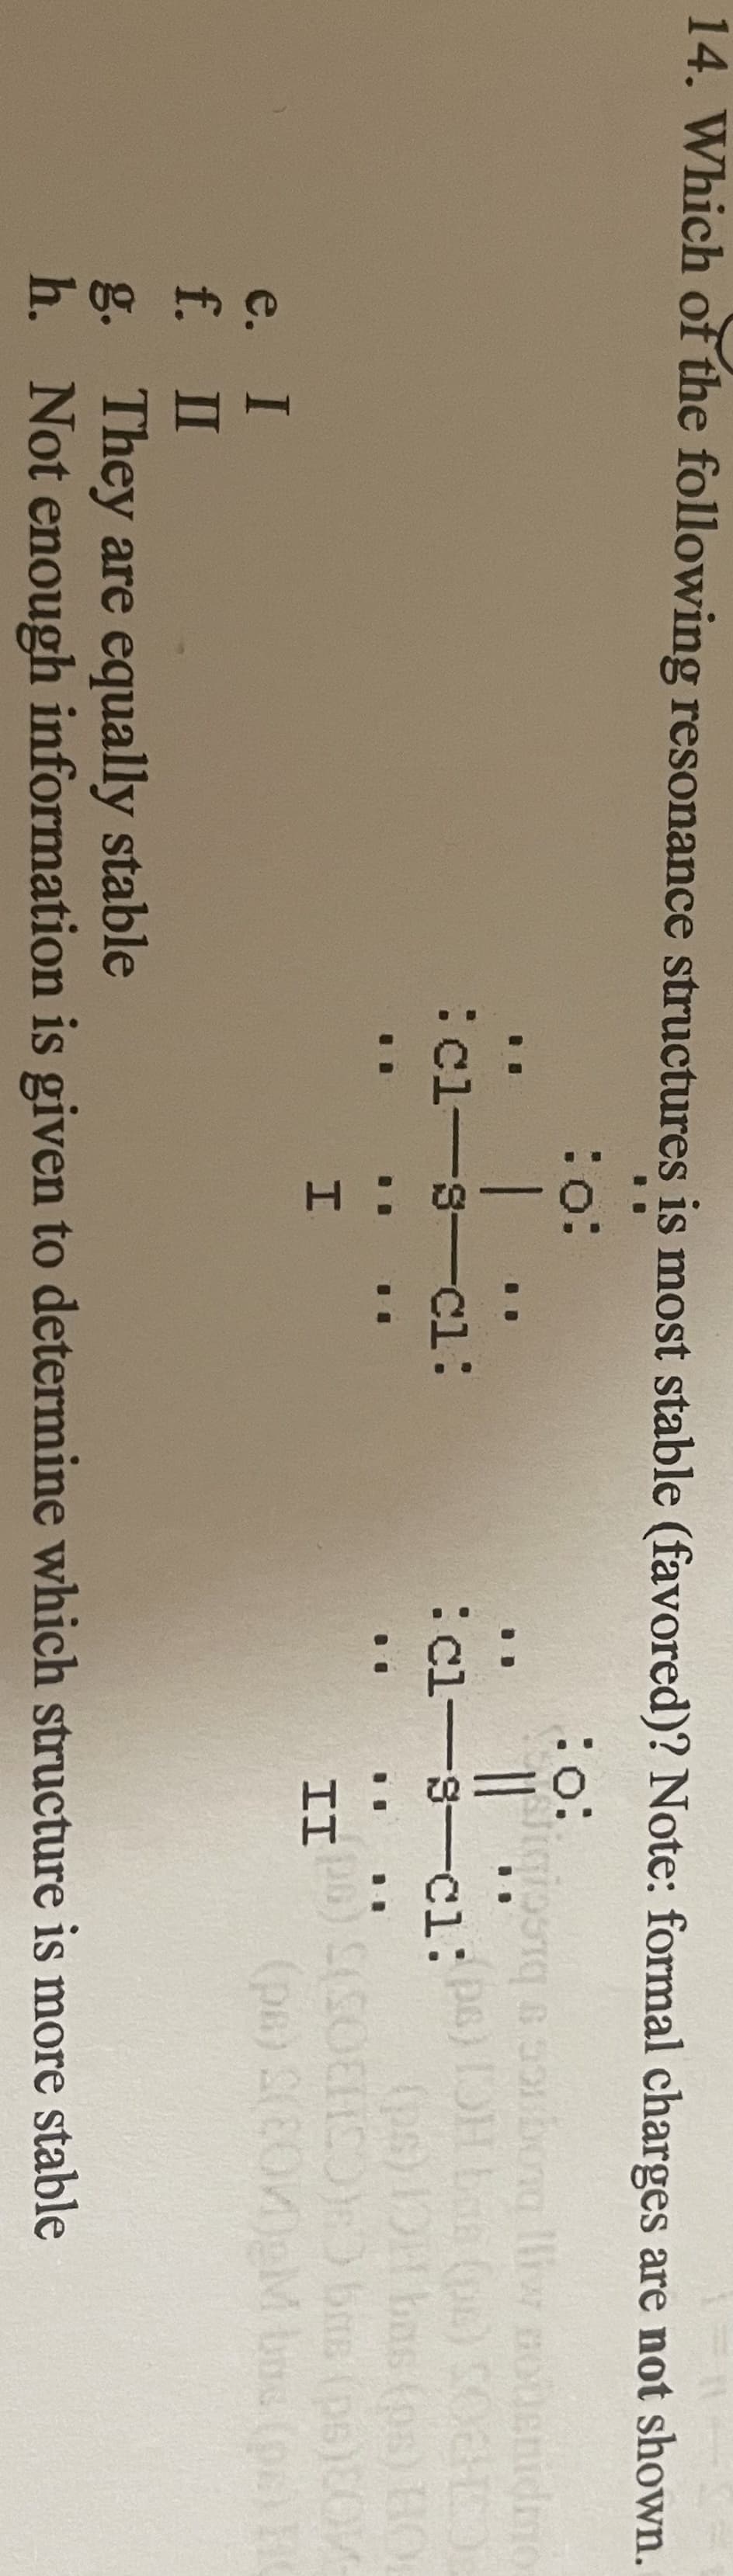 14. Which of the following resonance structures is most stable (favored)? Note: formal charges are not shown.
B
:o:
e. I
f.
II
:o:
1
:cl-s-cl:
H:
11
ligiosiq & soubora lliw notenidmo
[OH bas (ps) SOC
(ps) OH bas (ps) HOL
:cl-s-cl:ps)
II DB) S(SOHO):) bus (ps)COM-
(ps) 2(20M)gM bus (pr) HC
g. They are equally stable
h. Not enough information is given to determine which structure is more stable